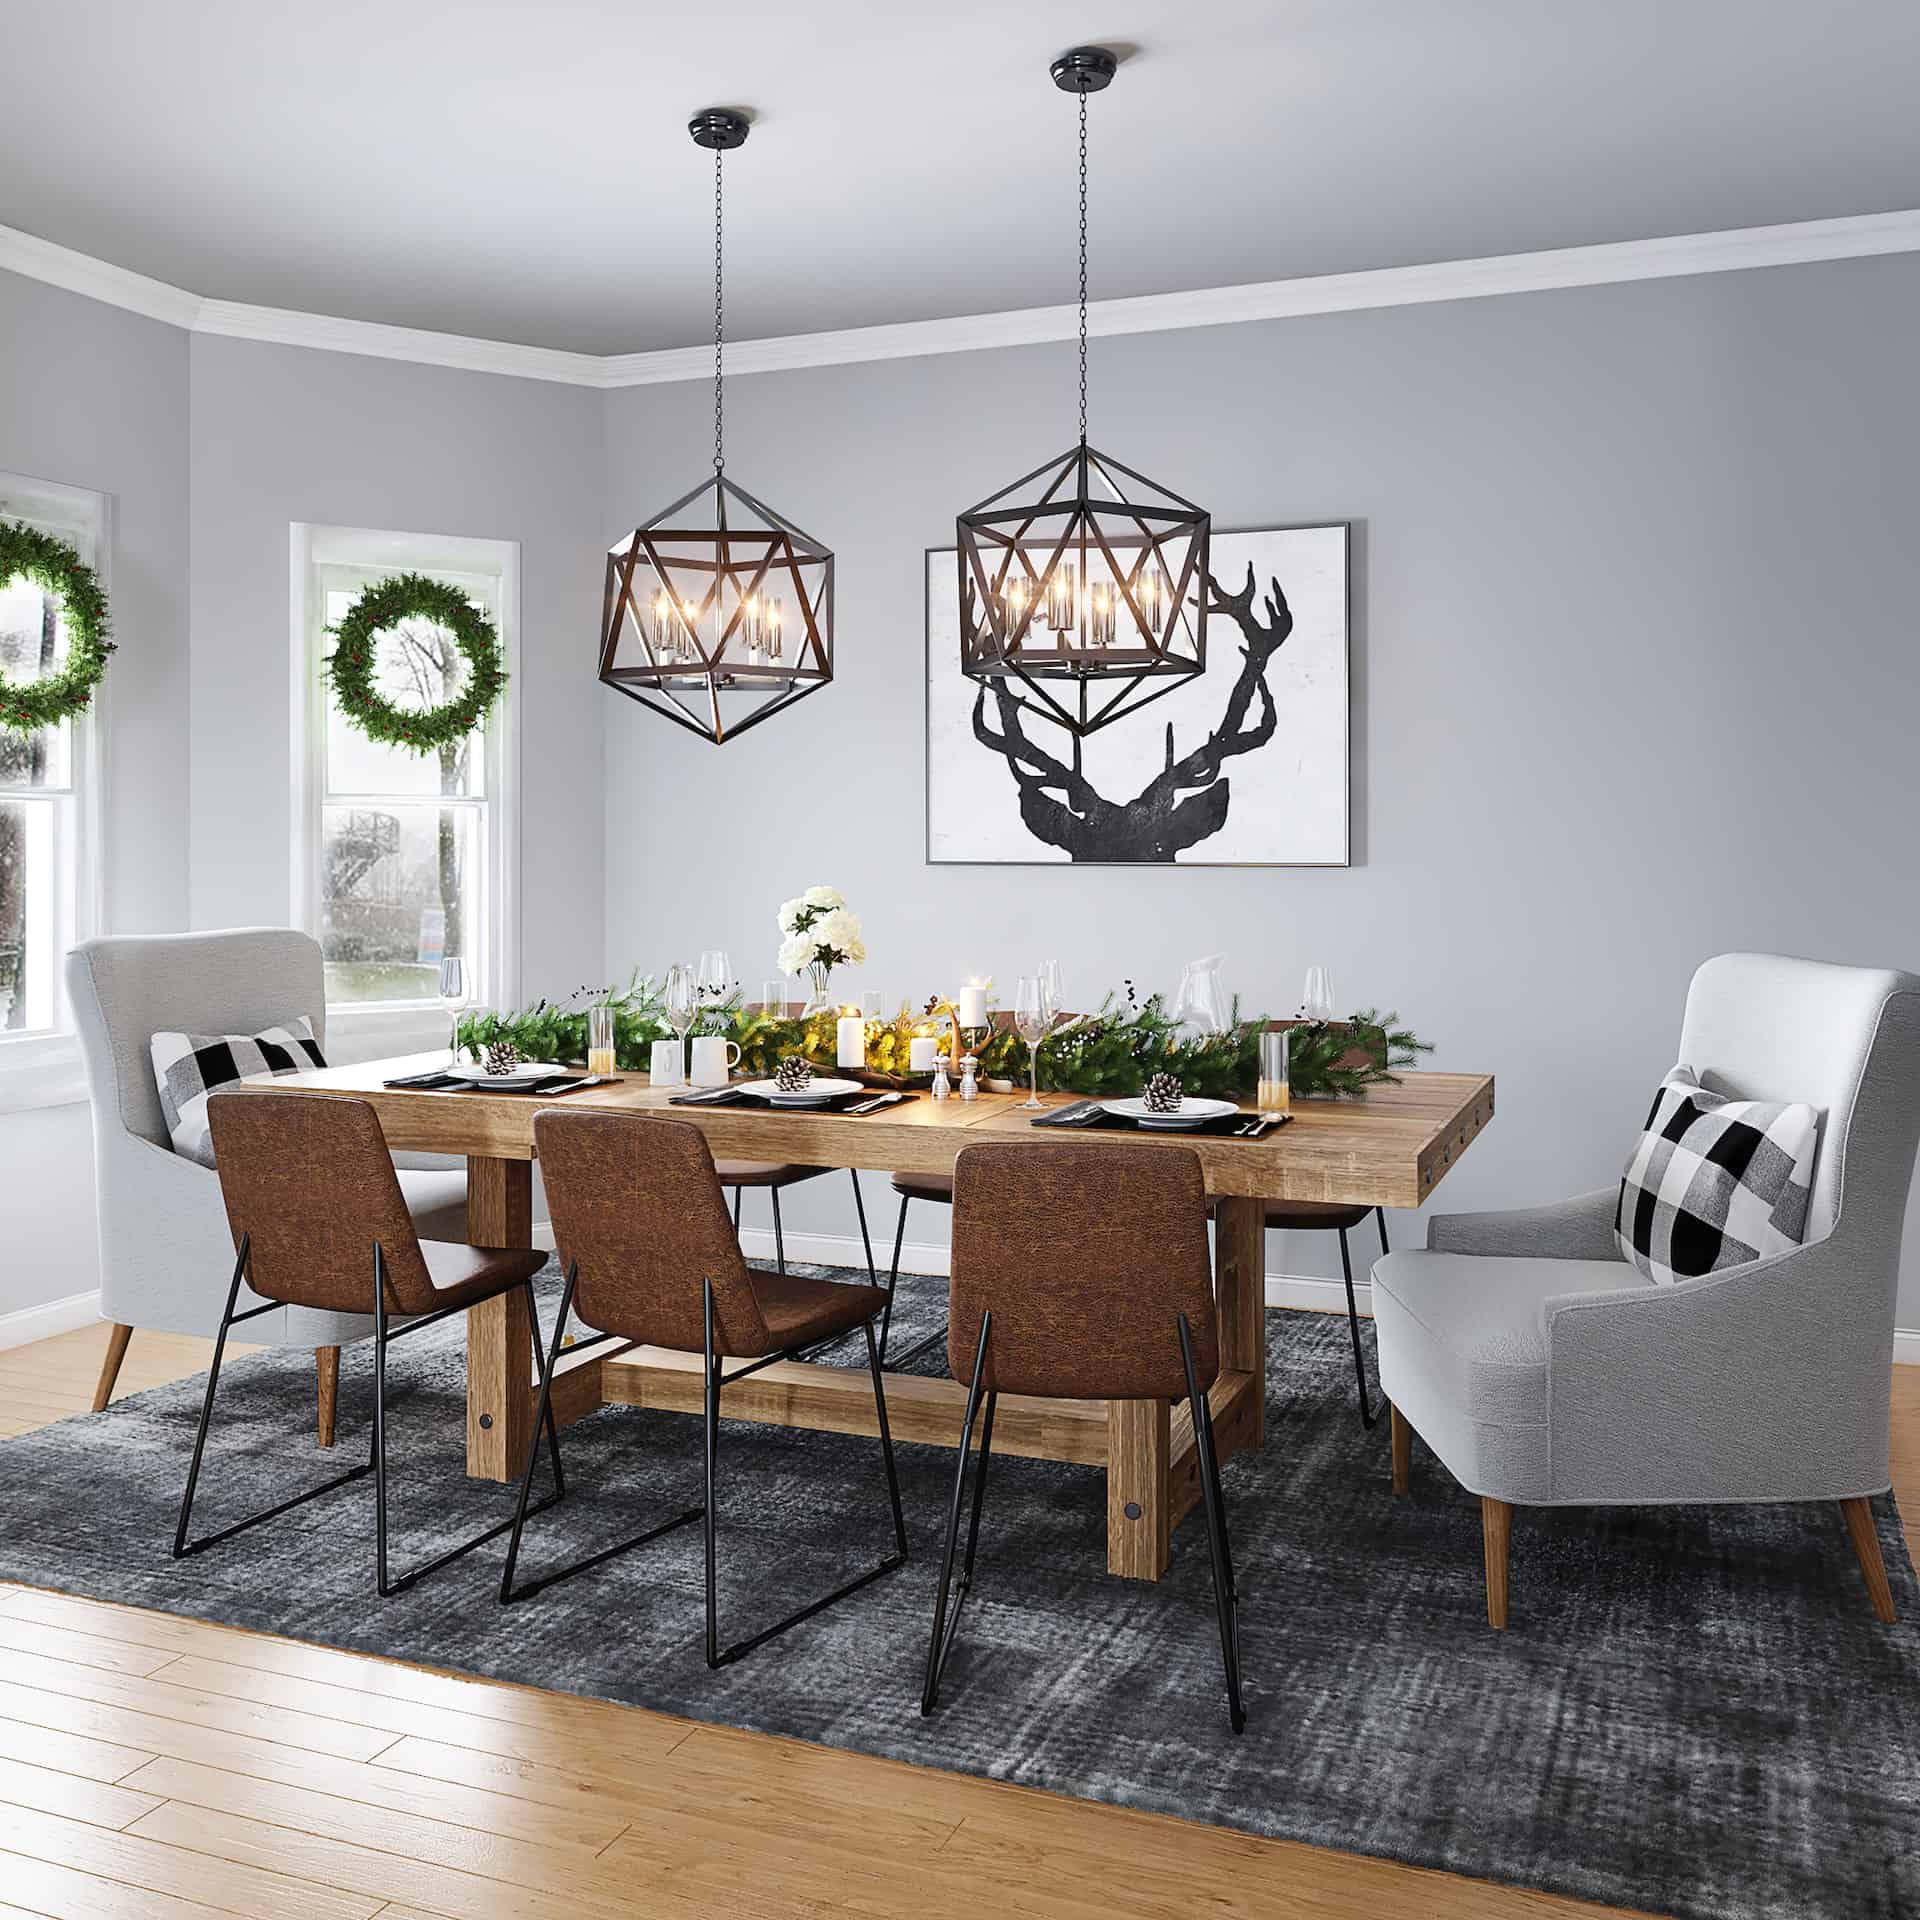 Dining Chairs: Designing the Perfect Seating for Your Home